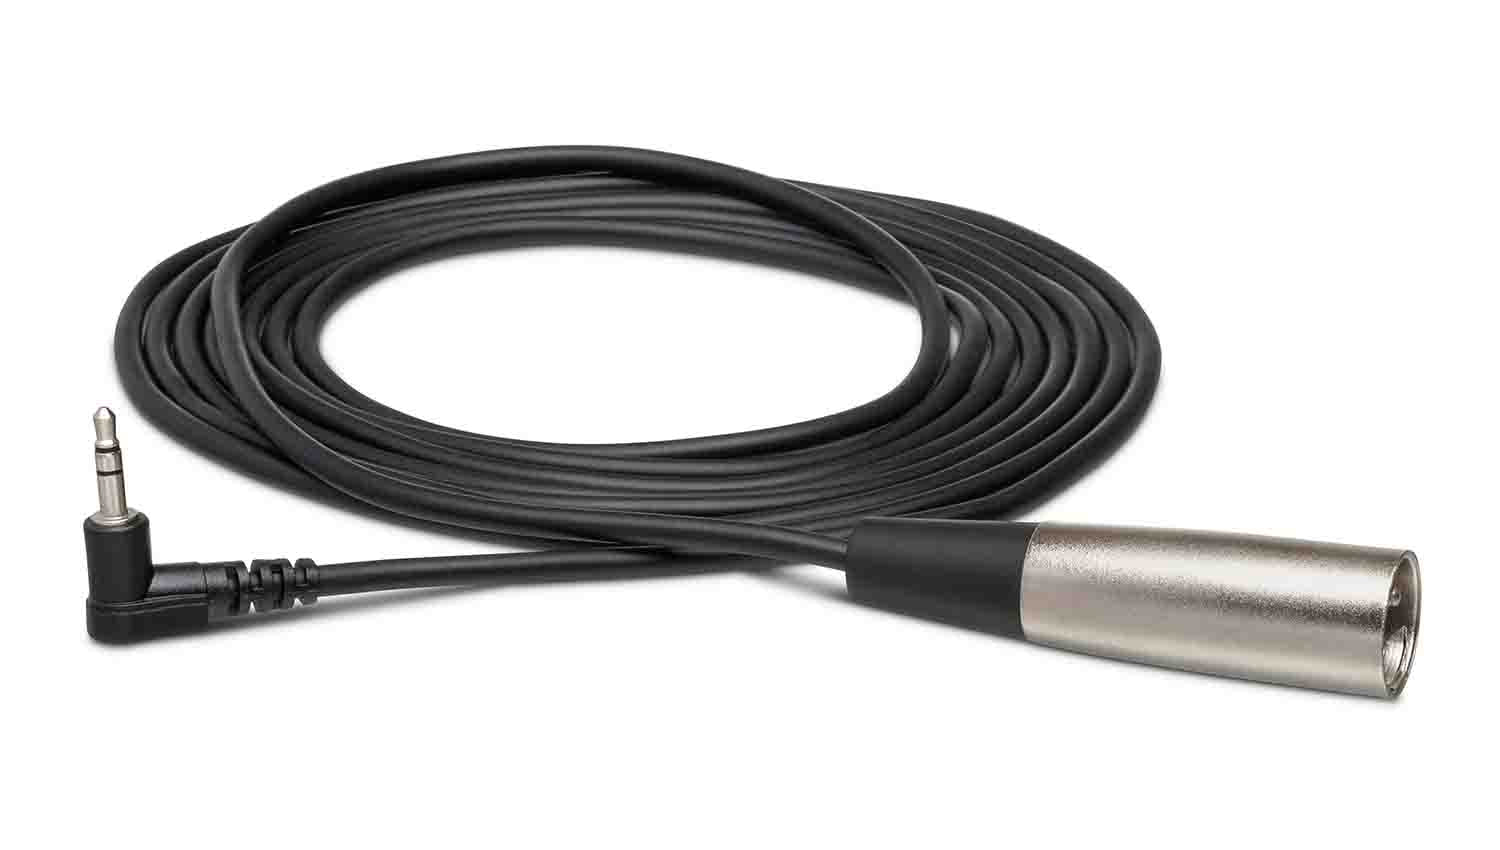 Hosa XVM-115M, XLR Male to Right Angle 3.5mm TRS Male Microphone Cable - 15 Feet - Hollywood DJ